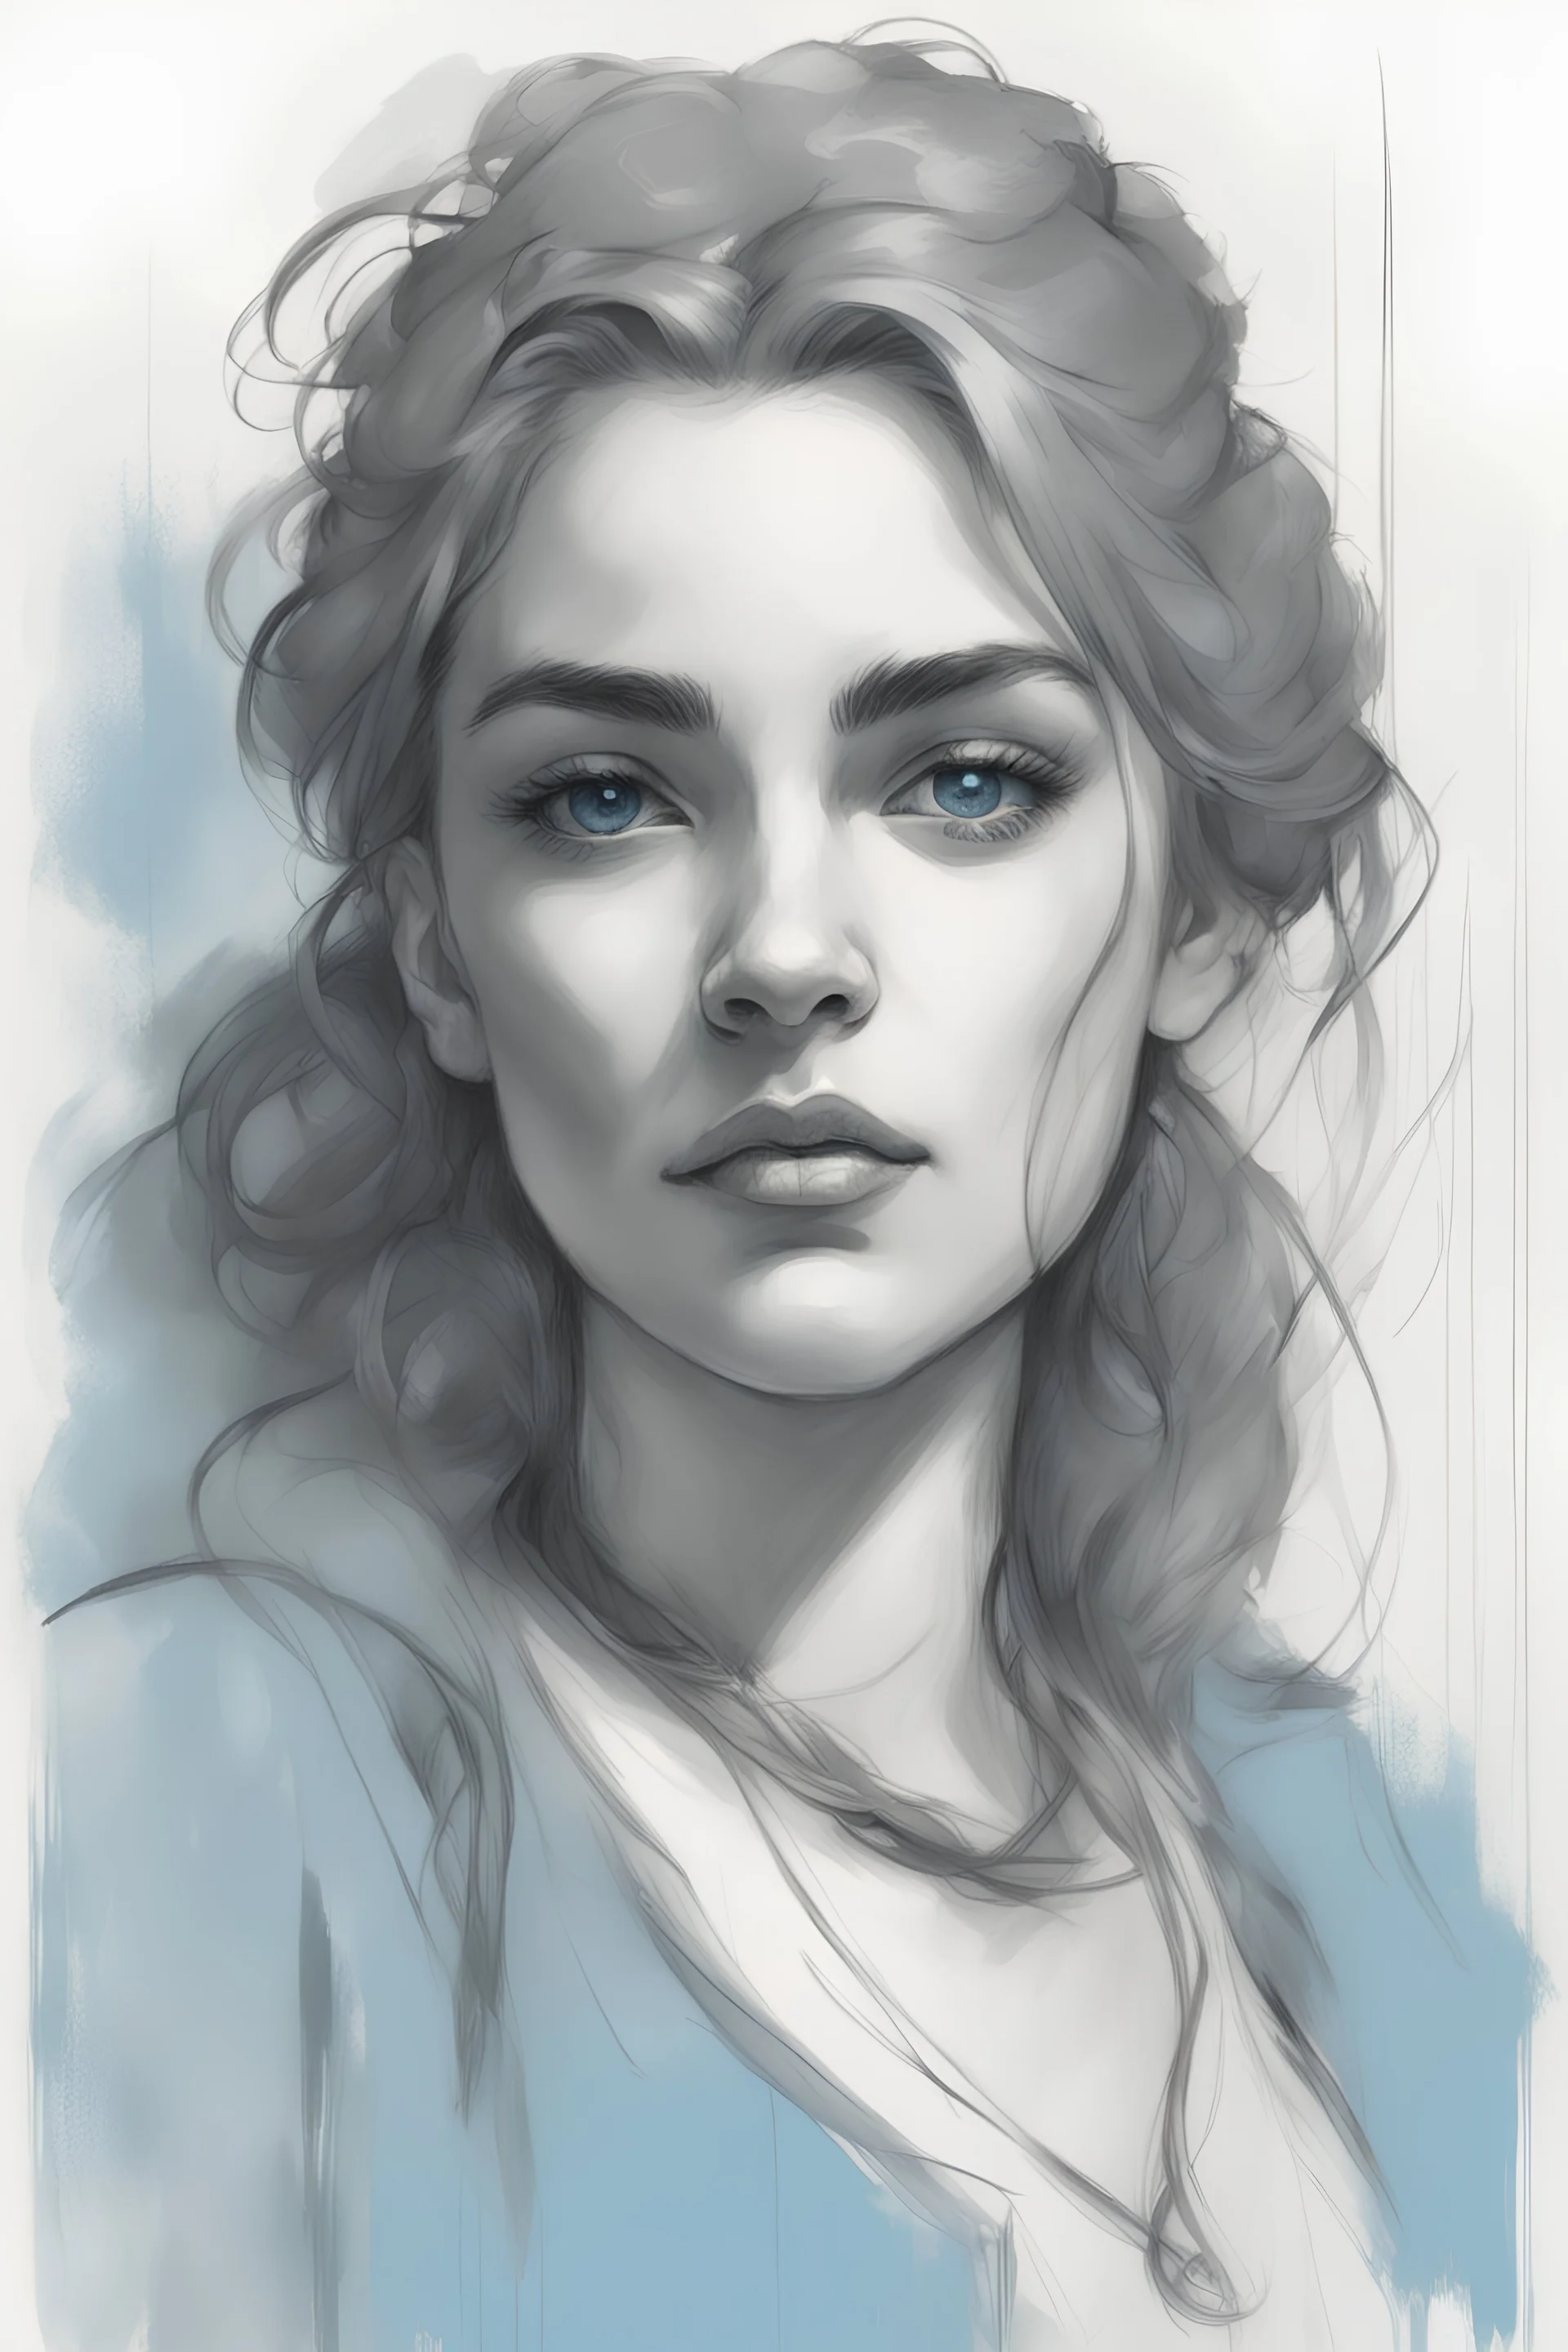 young woman portrait with beautiful thick eye brows, Drawing with a blue ink pen Inspired by the works of Daniel F. Gerhartz, with a fine art aesthetic and a highly detailed, realistic style